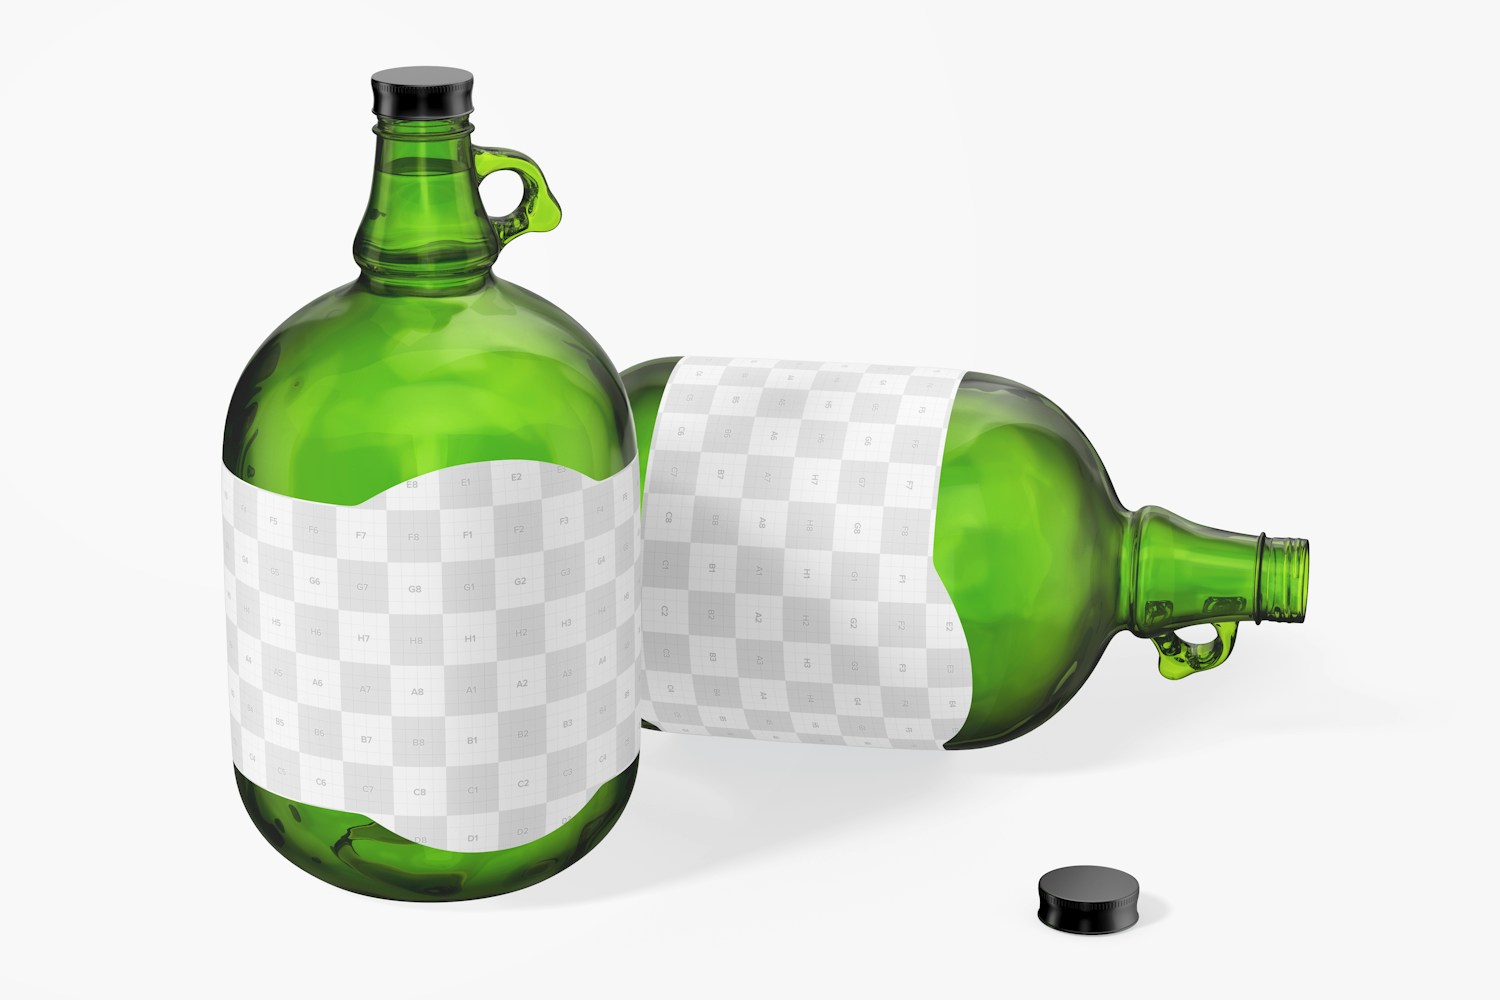 Glass Beer Bottles with Handle Mockup, Standing and Dropped